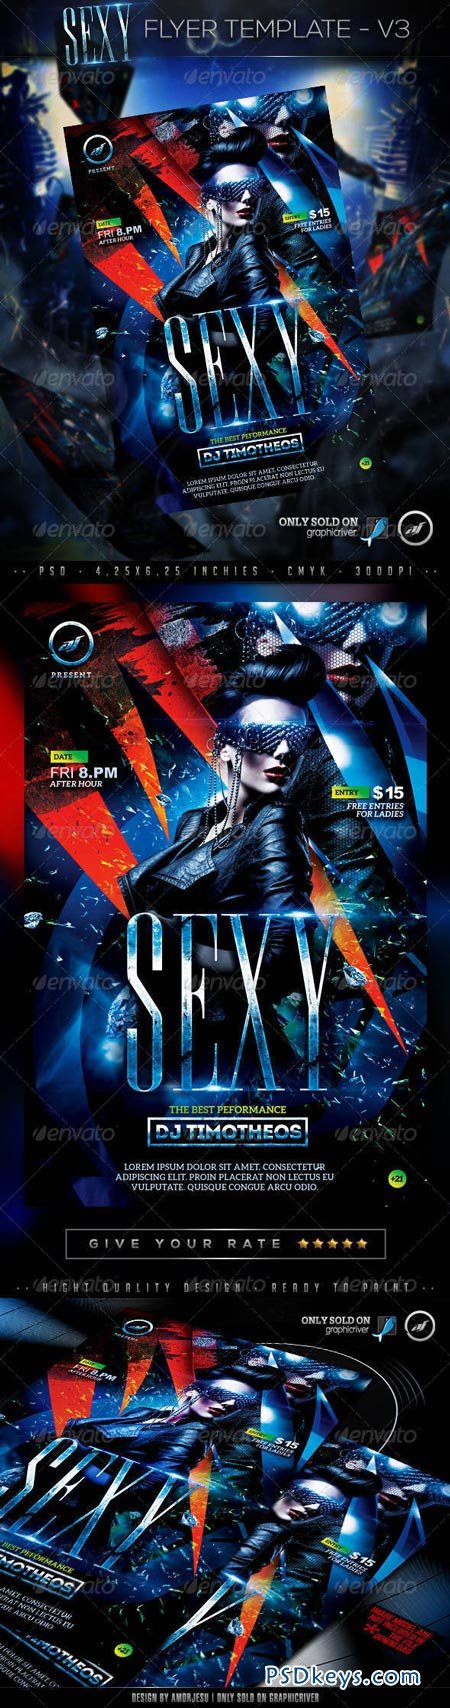 Sexy Flyer Template V3 7940352